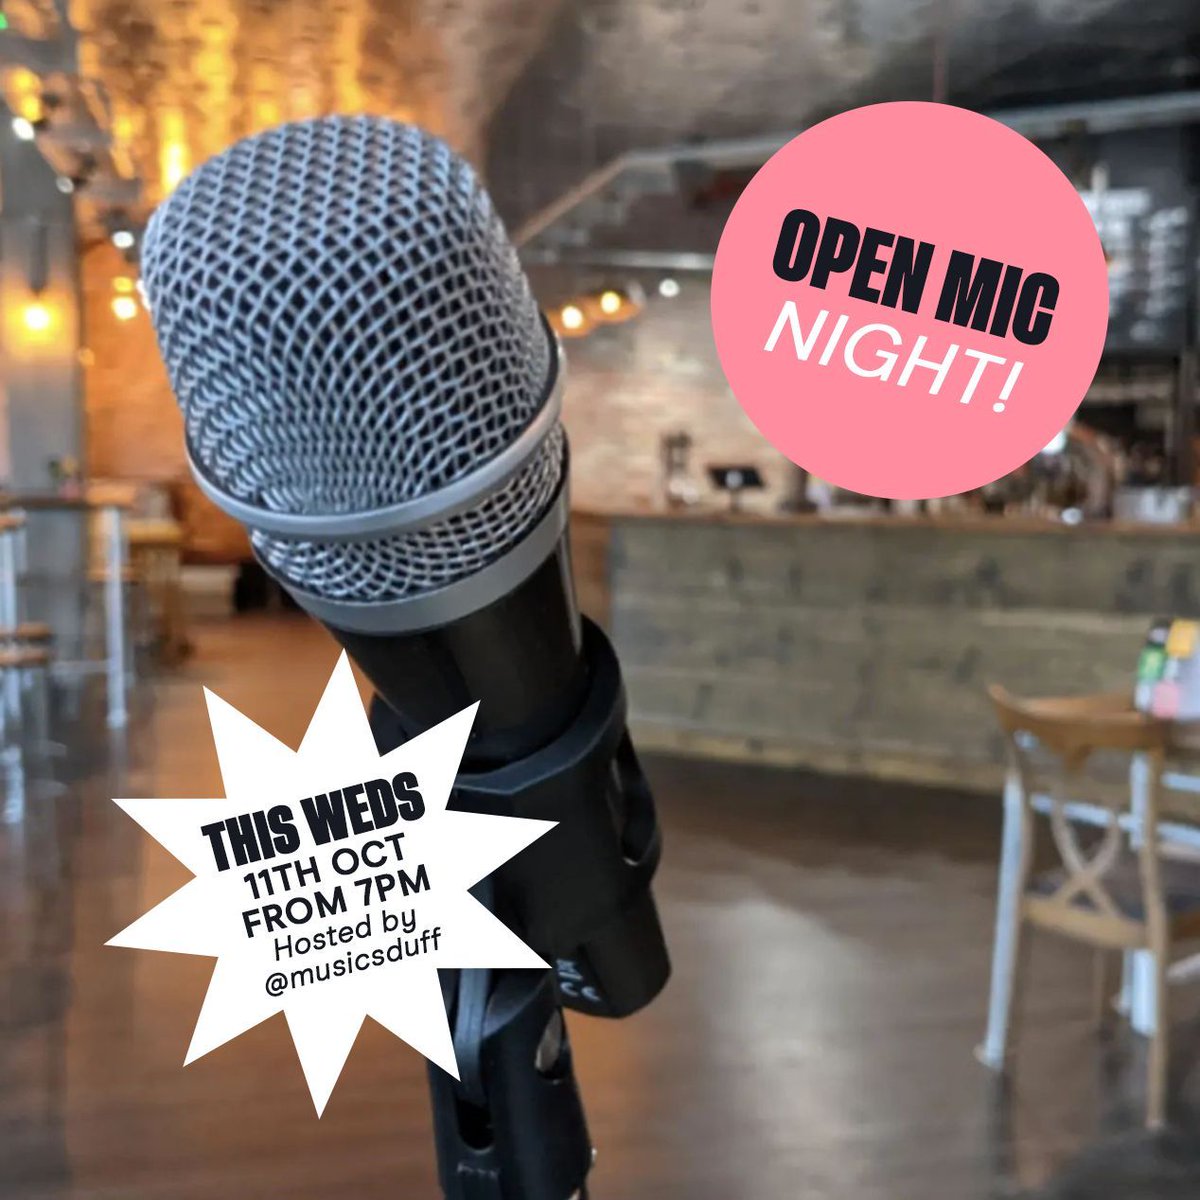 Join us this Weds at our Middlewood Locks Beerhouse from 7pm for a fantastic evening filled with live music, hosted by Duffy! If you'd like to showcase your talent, drop a message to @musicsduff on Insta to book your slot or just turn up 🎤🎶 FREE PINT 🍺 for every performer!